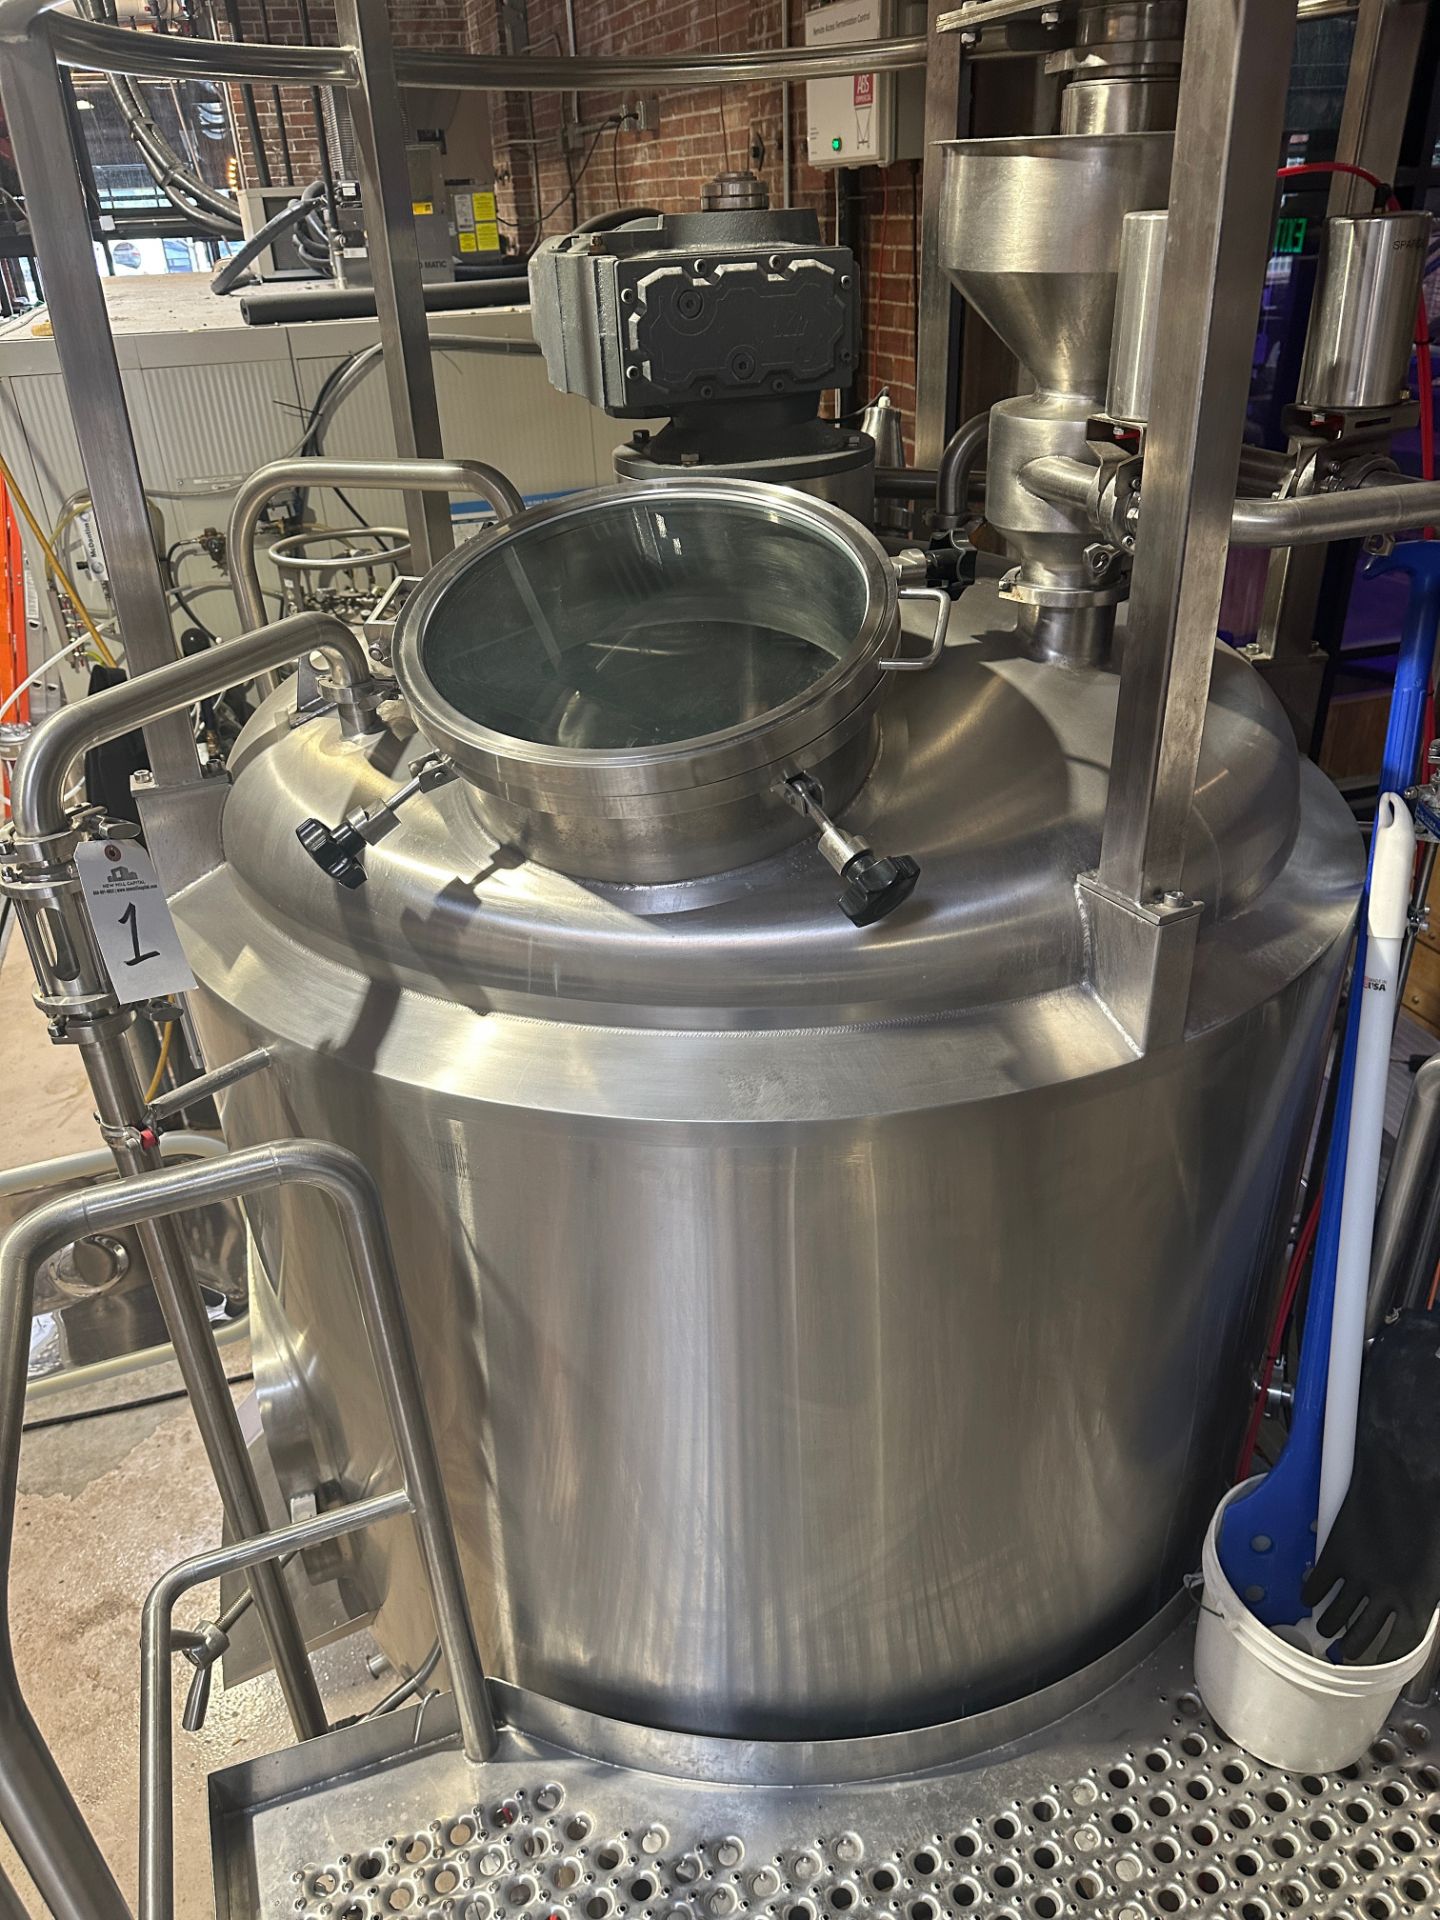 2019 ABS 10 BBL 2-Vessel Brewhouse with Grist Case - Mash/Lauter Tun (Approx. 5' Di | Rig Fee $4500 - Image 4 of 24